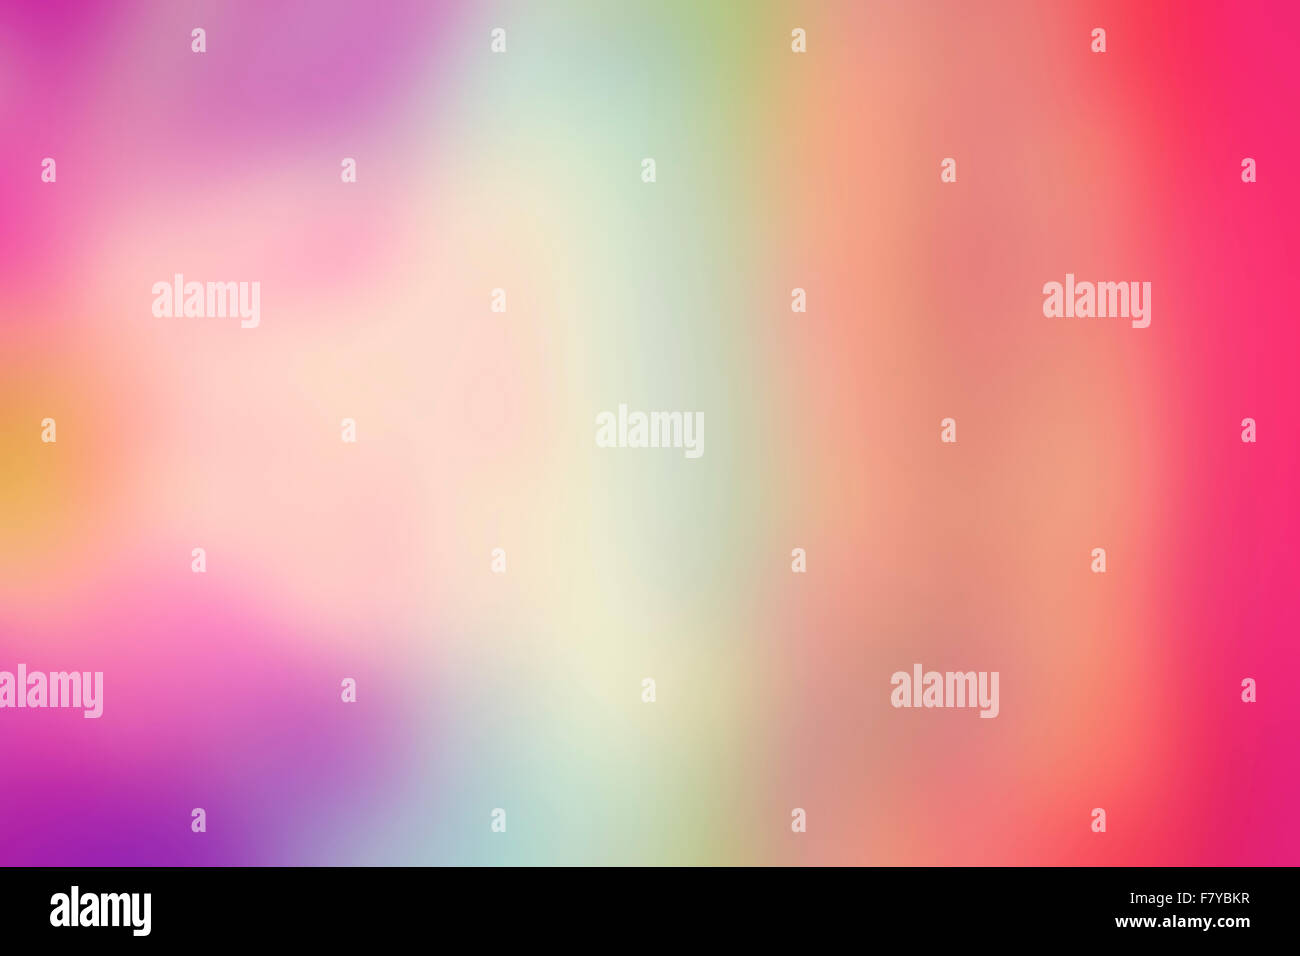 Abstract blurred colorful background. Stock Photo